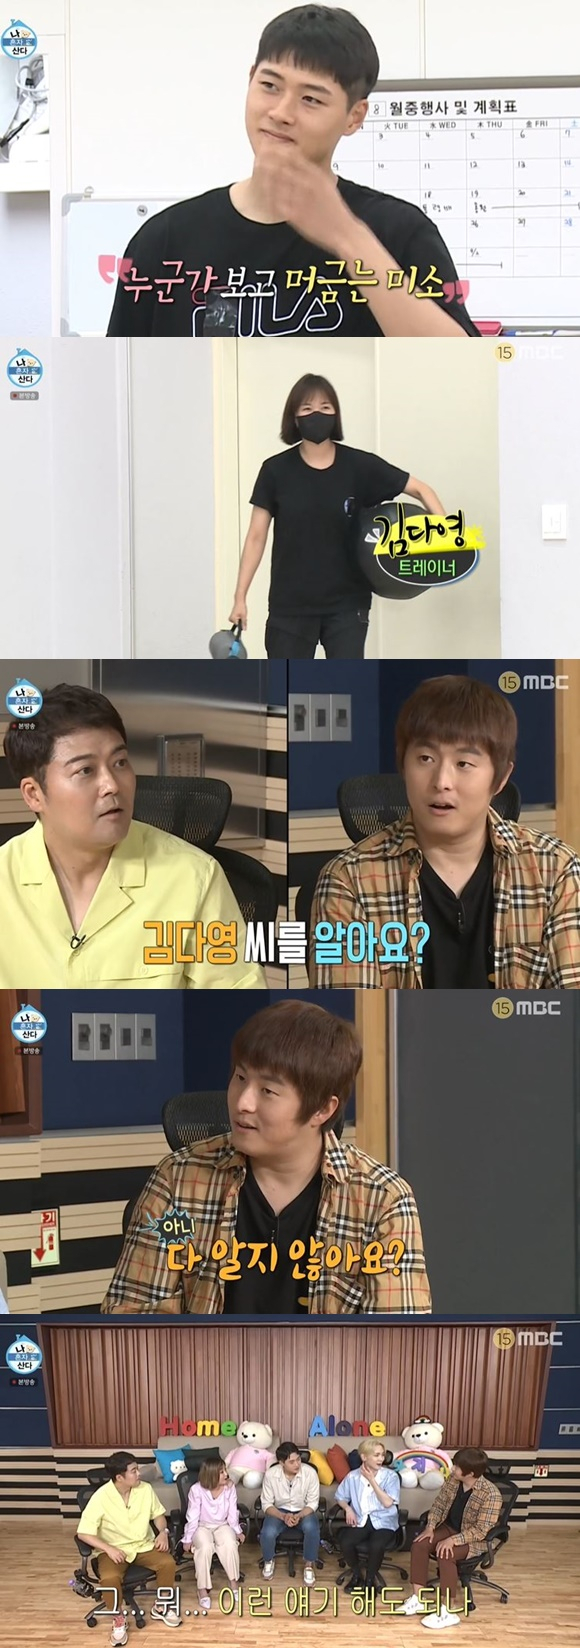 On the afternoon of the 27th, MBC entertainment program I Live Alone appeared in Oh Sang-uk as an Olympic star feature after last week.On that day, Oh Sang-uk showed a smile on someones appearance; in the womens silhouette, Kian84 pretended to know, I think I know who I am.The person Kian84 guessed was Hong Hyo-jin, the female friend fencing female national team player of Oh Sang-uk, but it was Kim Dae-young trainer who appeared in the video.Jun Hyun-moo said, Do you know Kim Dae-young? And Kian84 was embarrassed to say, Can I talk about this?At the same time, the caption I am not him came to me and laughed. Kian84 laughed, saying, I thought I knew.Then, while returning home from training, Oh Sang-uk picked up a Heize song, so the MCs said, Heize steaming fans.I would like Heize and Heize I feel good .Oh Sang-uk said, When I heard that song, it sounded sad, but I felt good when I heard it after the end of the song. Park Na-rae said, Lets say a word to Heize.When the key next to him said, Do you have something to say to Heize, that Heize and Friend? Oh Sang-uk shyly said, Hello, Im listening to the song well.I will listen to you more in the future. Thank you. Kian84, who was worried about Haru Jongs exercise, said, I met friends and drank a little and did not have any of that. Oh Sang-uk replied, I had to meet Friend, but I did not have time to win the gold medal.Jun Hyun-moo asked, So I have a schedule and what do you want to do if you do not have anything to do all day? Oh Sang-uk said, I want to have a drink with friends once.